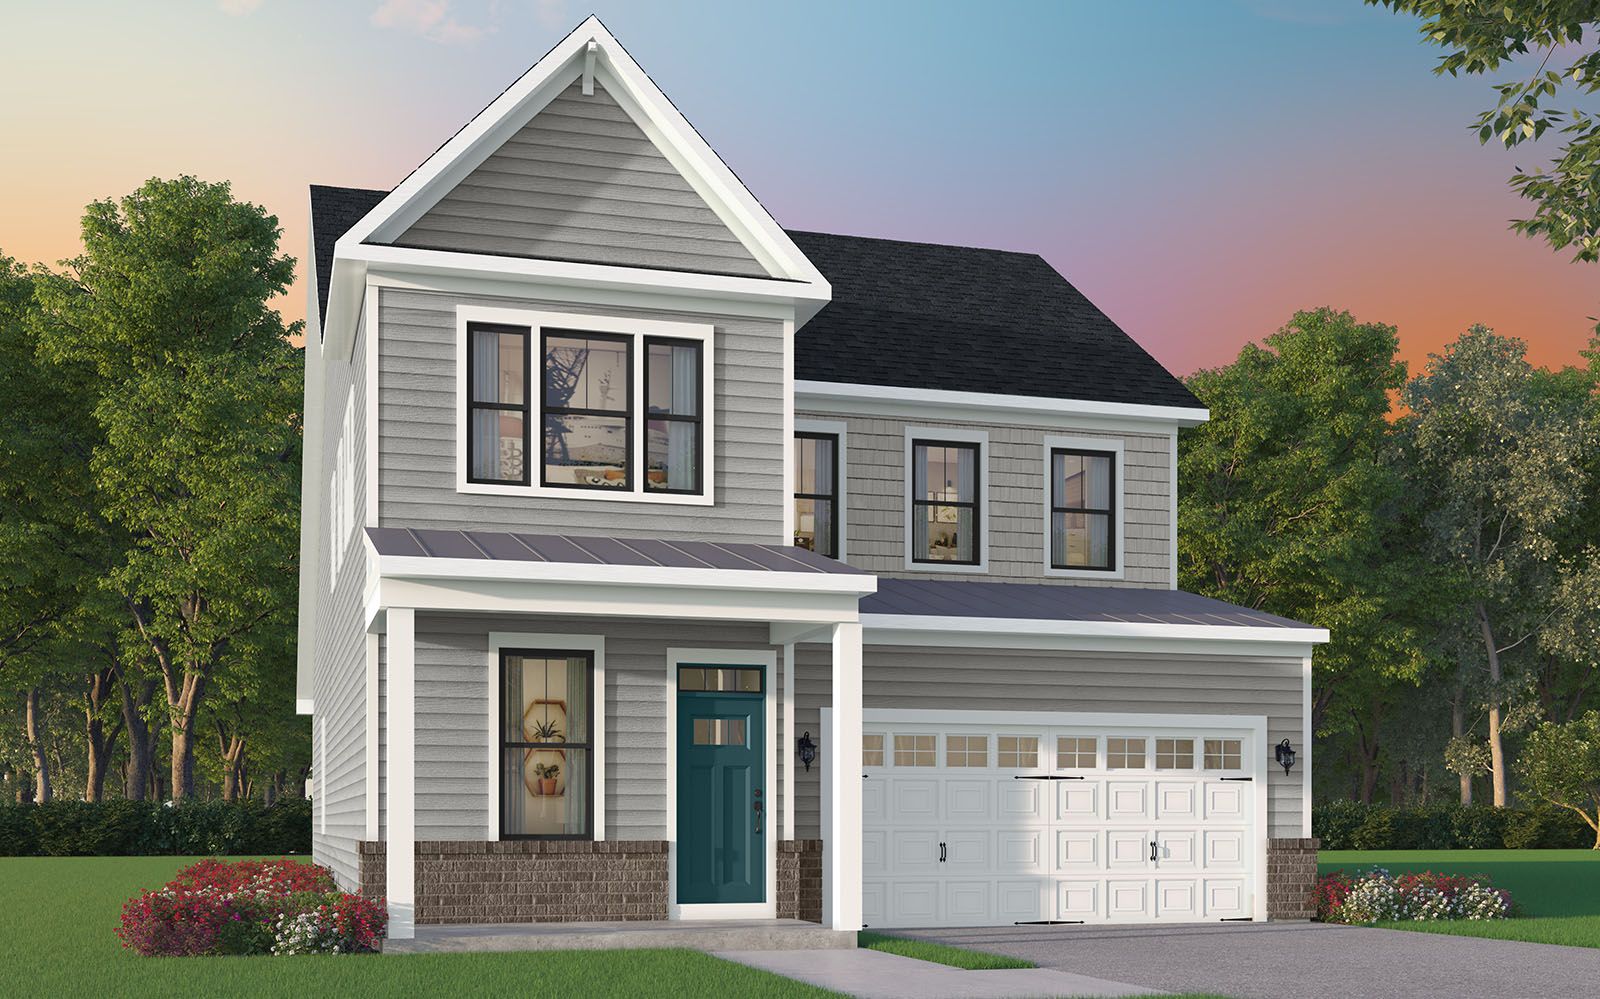 Elevation 4:A rendering of elevation 4 of the Declan at Wendell Falls by Brookfield Residential